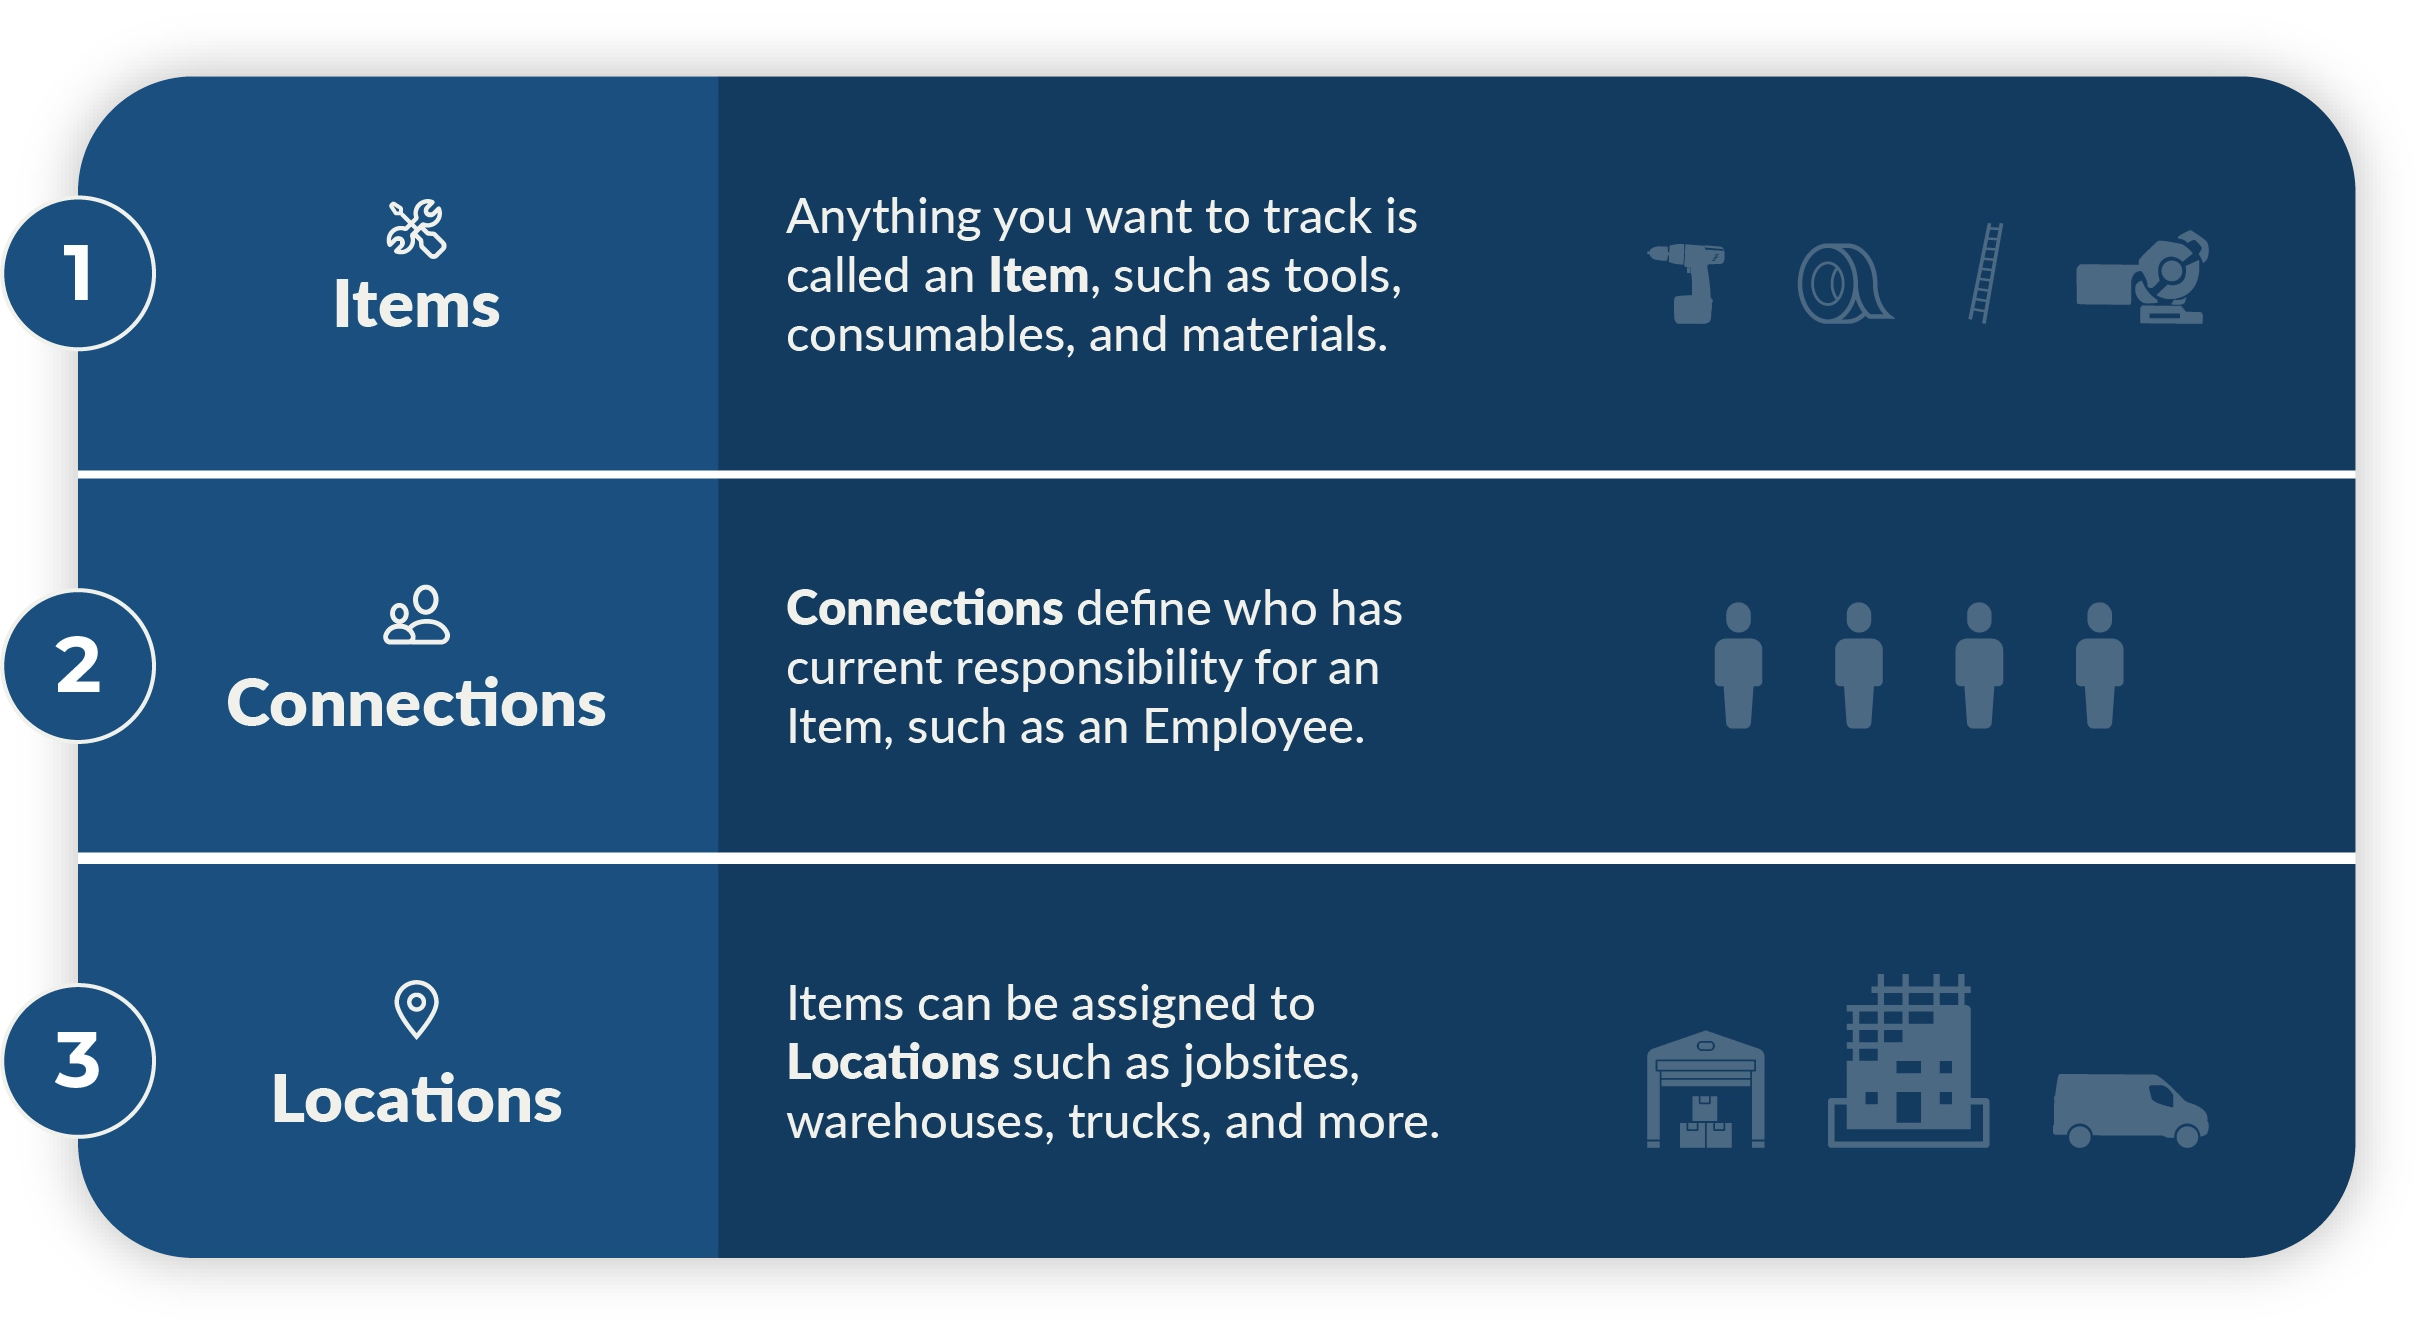 Items: Anything you want to track is called an Item, such as tools, consumables, and materials. Connections: Connections define who has current responsibility for an Item, such as an Employee. Locations: Items can be assigned to Locations such as jobsites, warehouses, trucks, and more.